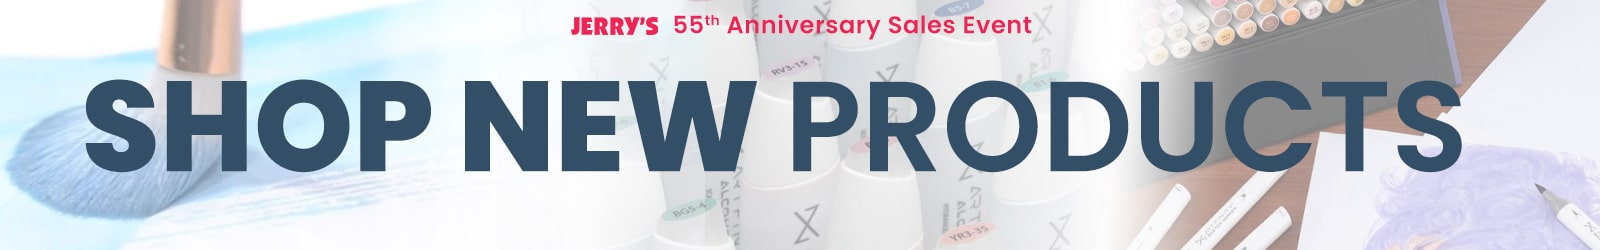 Jerry's 55th Anniversary Everything Super Sale